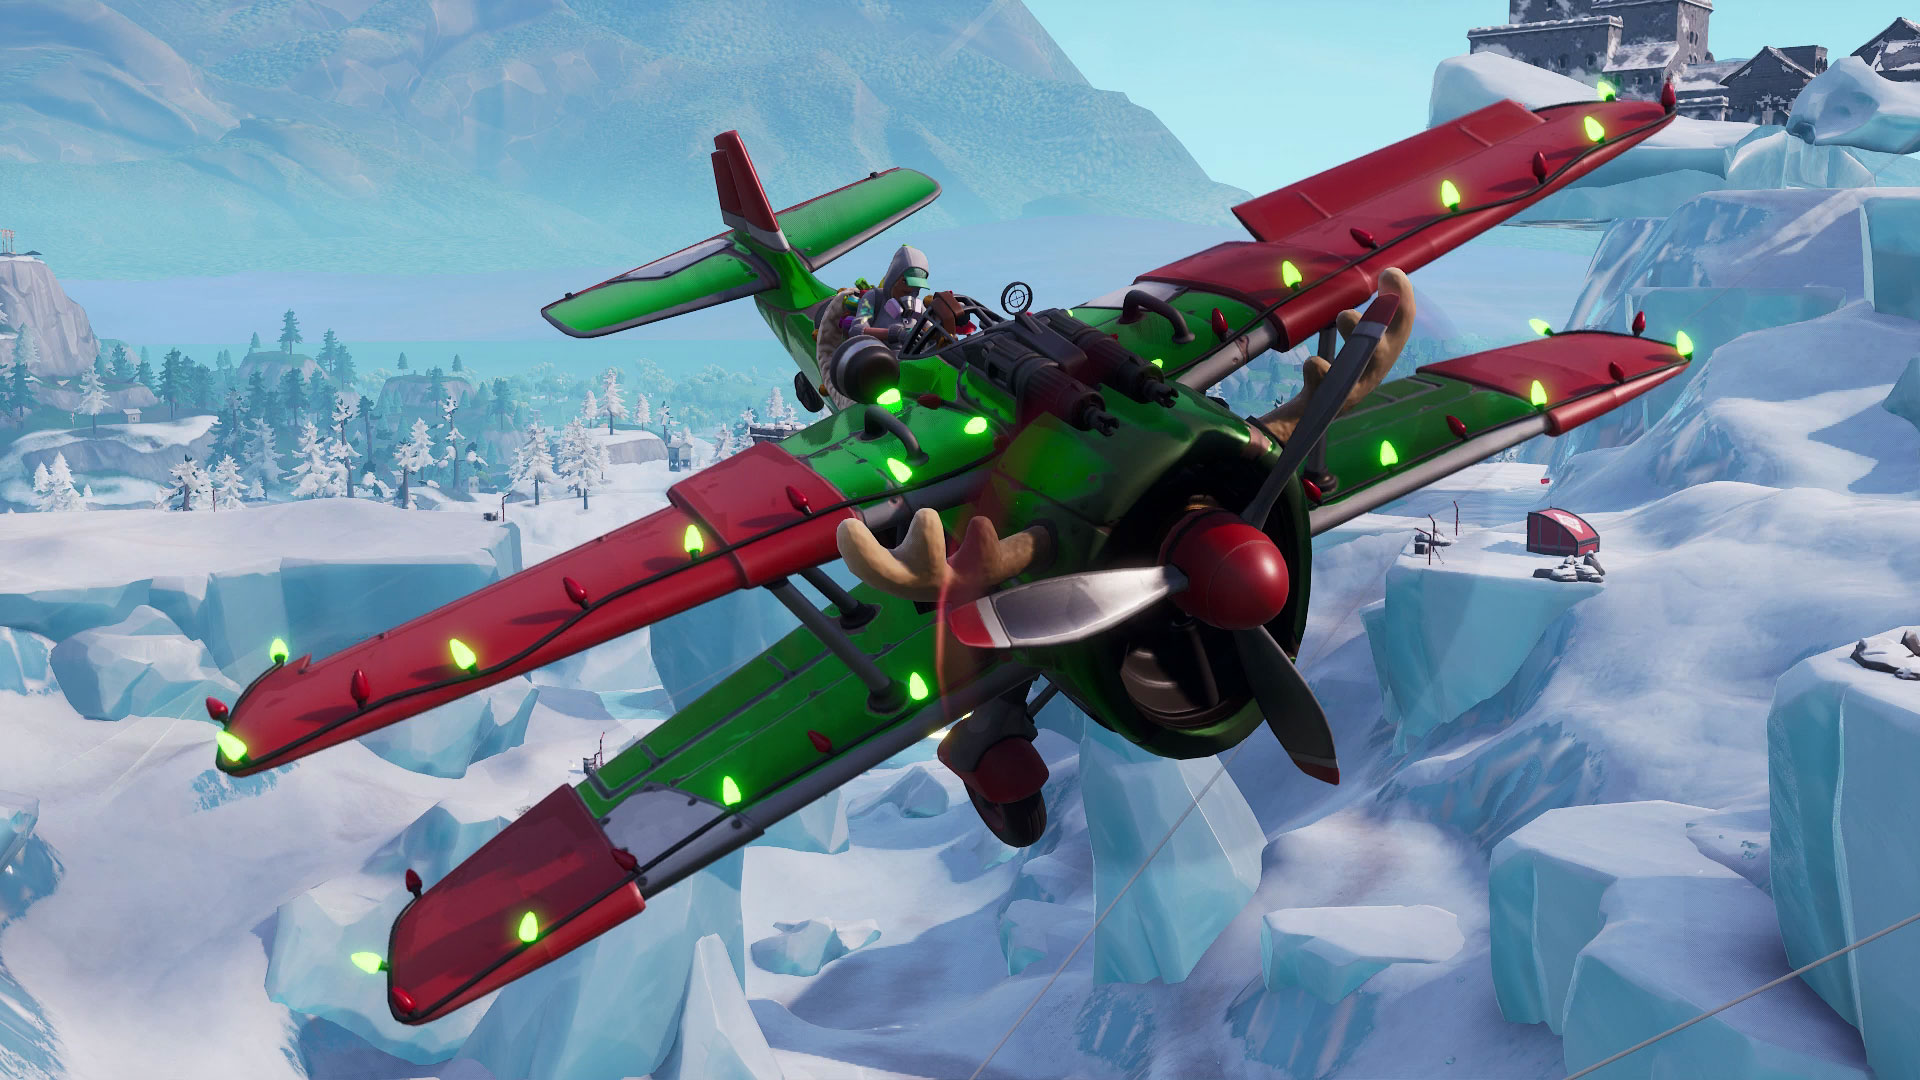 How To Land A Plane In Fortnite Where To Find A Fortnite Plane And Take To The Skies For Aerial Combat Gamesradar